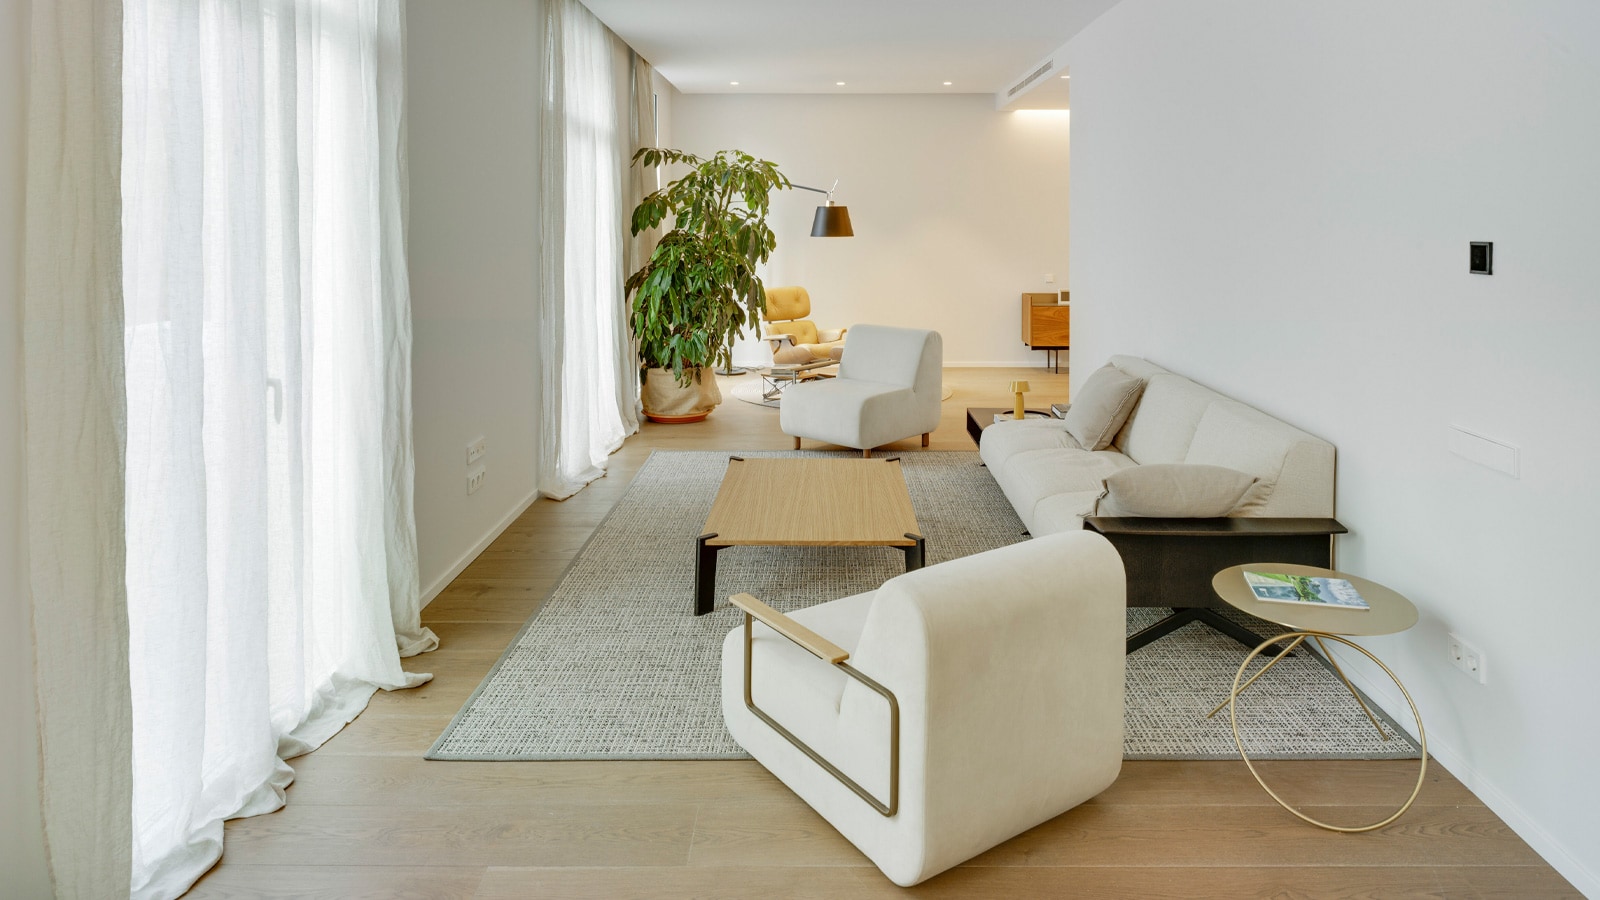 Residential AC33 in Valencia: a historic building, renovated with Porcelanosa